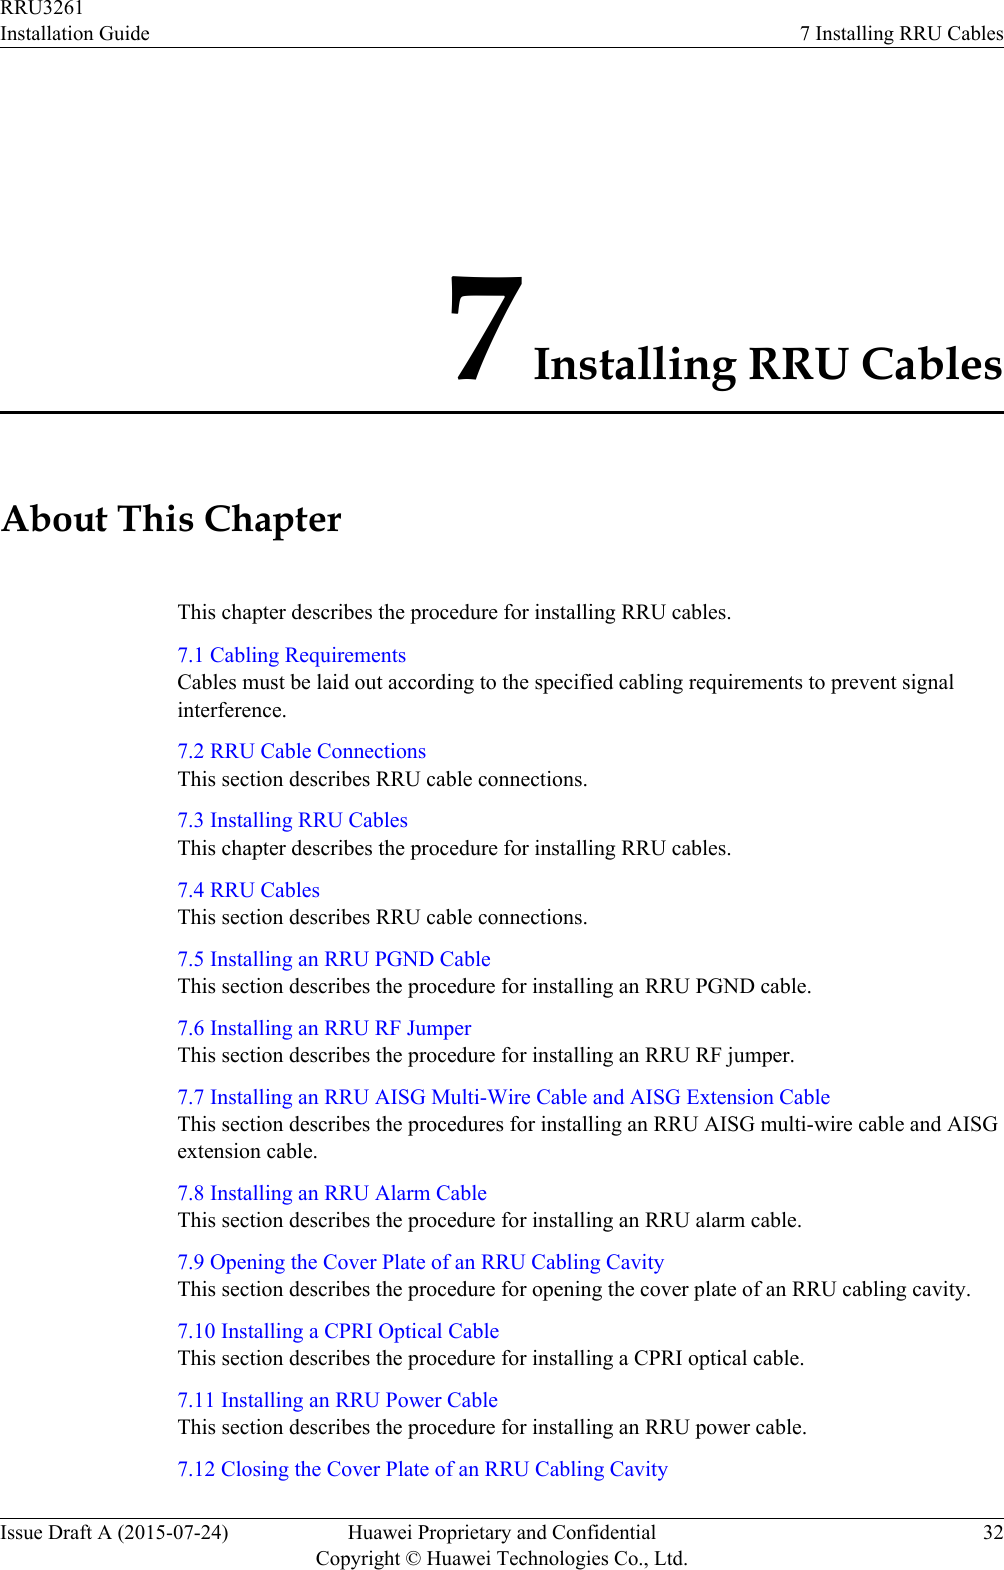 7 Installing RRU CablesAbout This ChapterThis chapter describes the procedure for installing RRU cables.7.1 Cabling RequirementsCables must be laid out according to the specified cabling requirements to prevent signalinterference.7.2 RRU Cable ConnectionsThis section describes RRU cable connections.7.3 Installing RRU CablesThis chapter describes the procedure for installing RRU cables.7.4 RRU CablesThis section describes RRU cable connections.7.5 Installing an RRU PGND CableThis section describes the procedure for installing an RRU PGND cable.7.6 Installing an RRU RF JumperThis section describes the procedure for installing an RRU RF jumper.7.7 Installing an RRU AISG Multi-Wire Cable and AISG Extension CableThis section describes the procedures for installing an RRU AISG multi-wire cable and AISGextension cable.7.8 Installing an RRU Alarm CableThis section describes the procedure for installing an RRU alarm cable.7.9 Opening the Cover Plate of an RRU Cabling CavityThis section describes the procedure for opening the cover plate of an RRU cabling cavity.7.10 Installing a CPRI Optical CableThis section describes the procedure for installing a CPRI optical cable.7.11 Installing an RRU Power CableThis section describes the procedure for installing an RRU power cable.7.12 Closing the Cover Plate of an RRU Cabling CavityRRU3261Installation Guide 7 Installing RRU CablesIssue Draft A (2015-07-24) Huawei Proprietary and ConfidentialCopyright © Huawei Technologies Co., Ltd.32